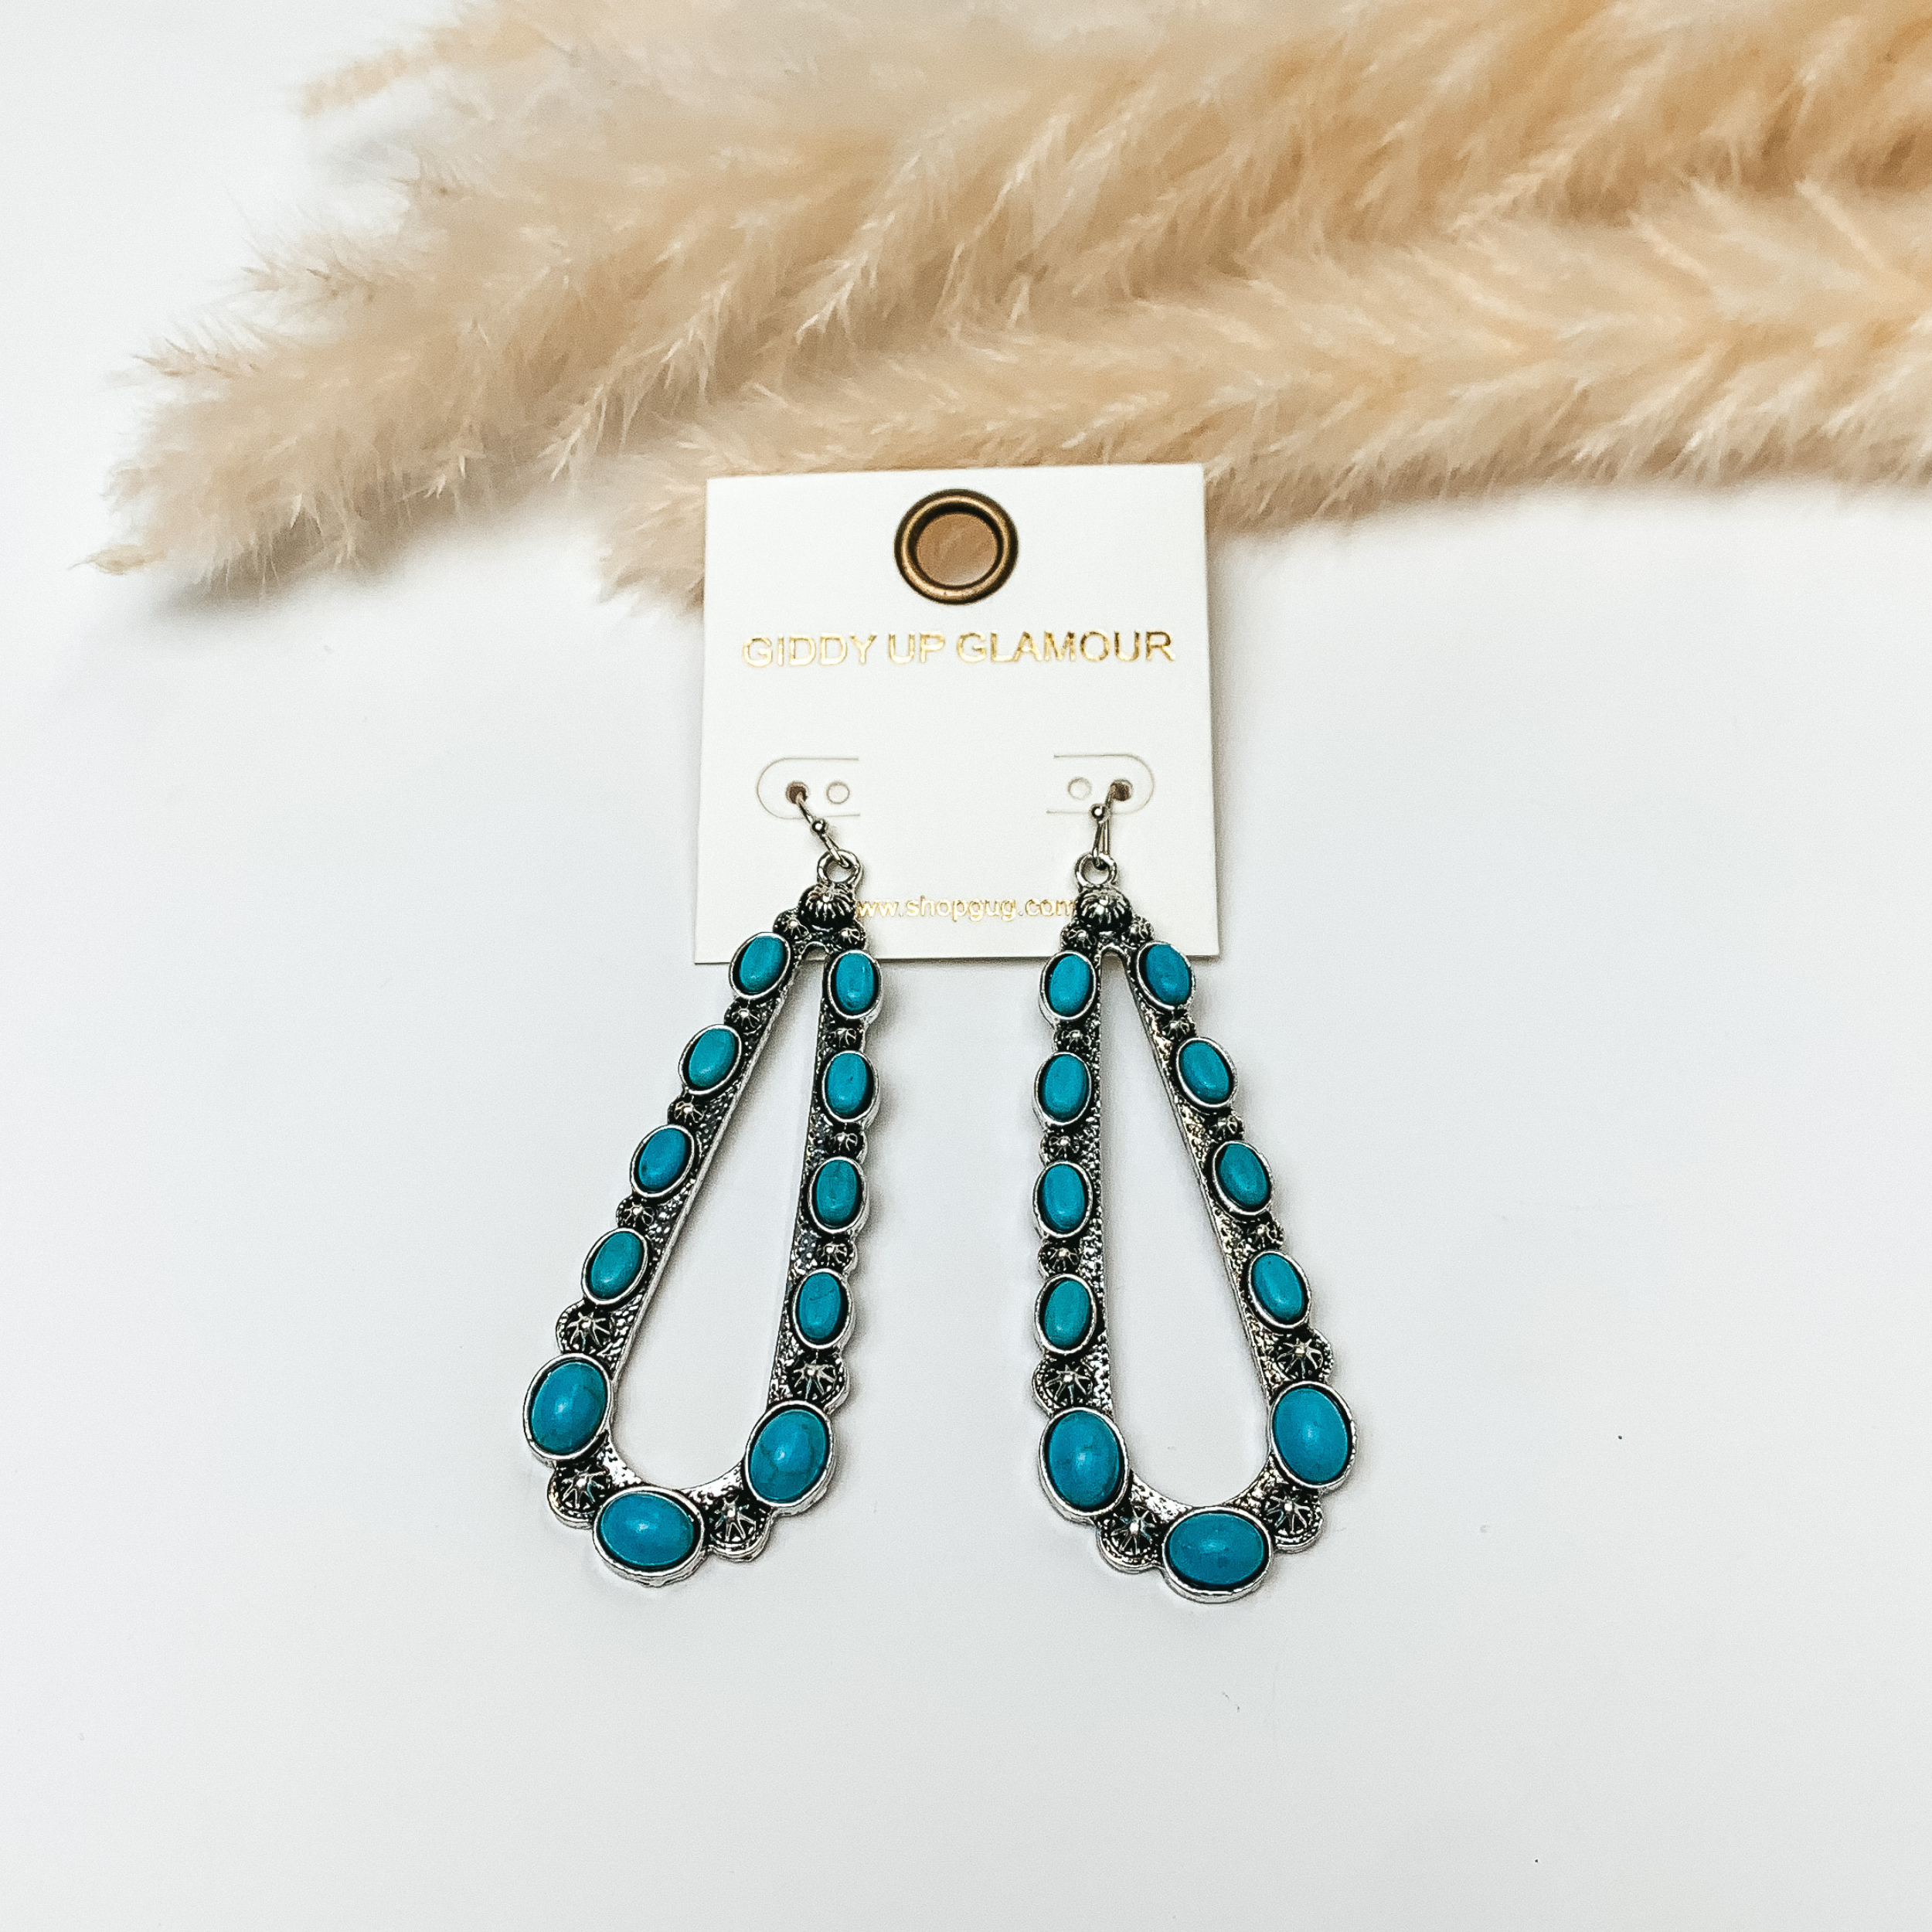 Western Design Silver Tone Teardrop Earrings with Turquoise Stones - Giddy Up Glamour Boutique